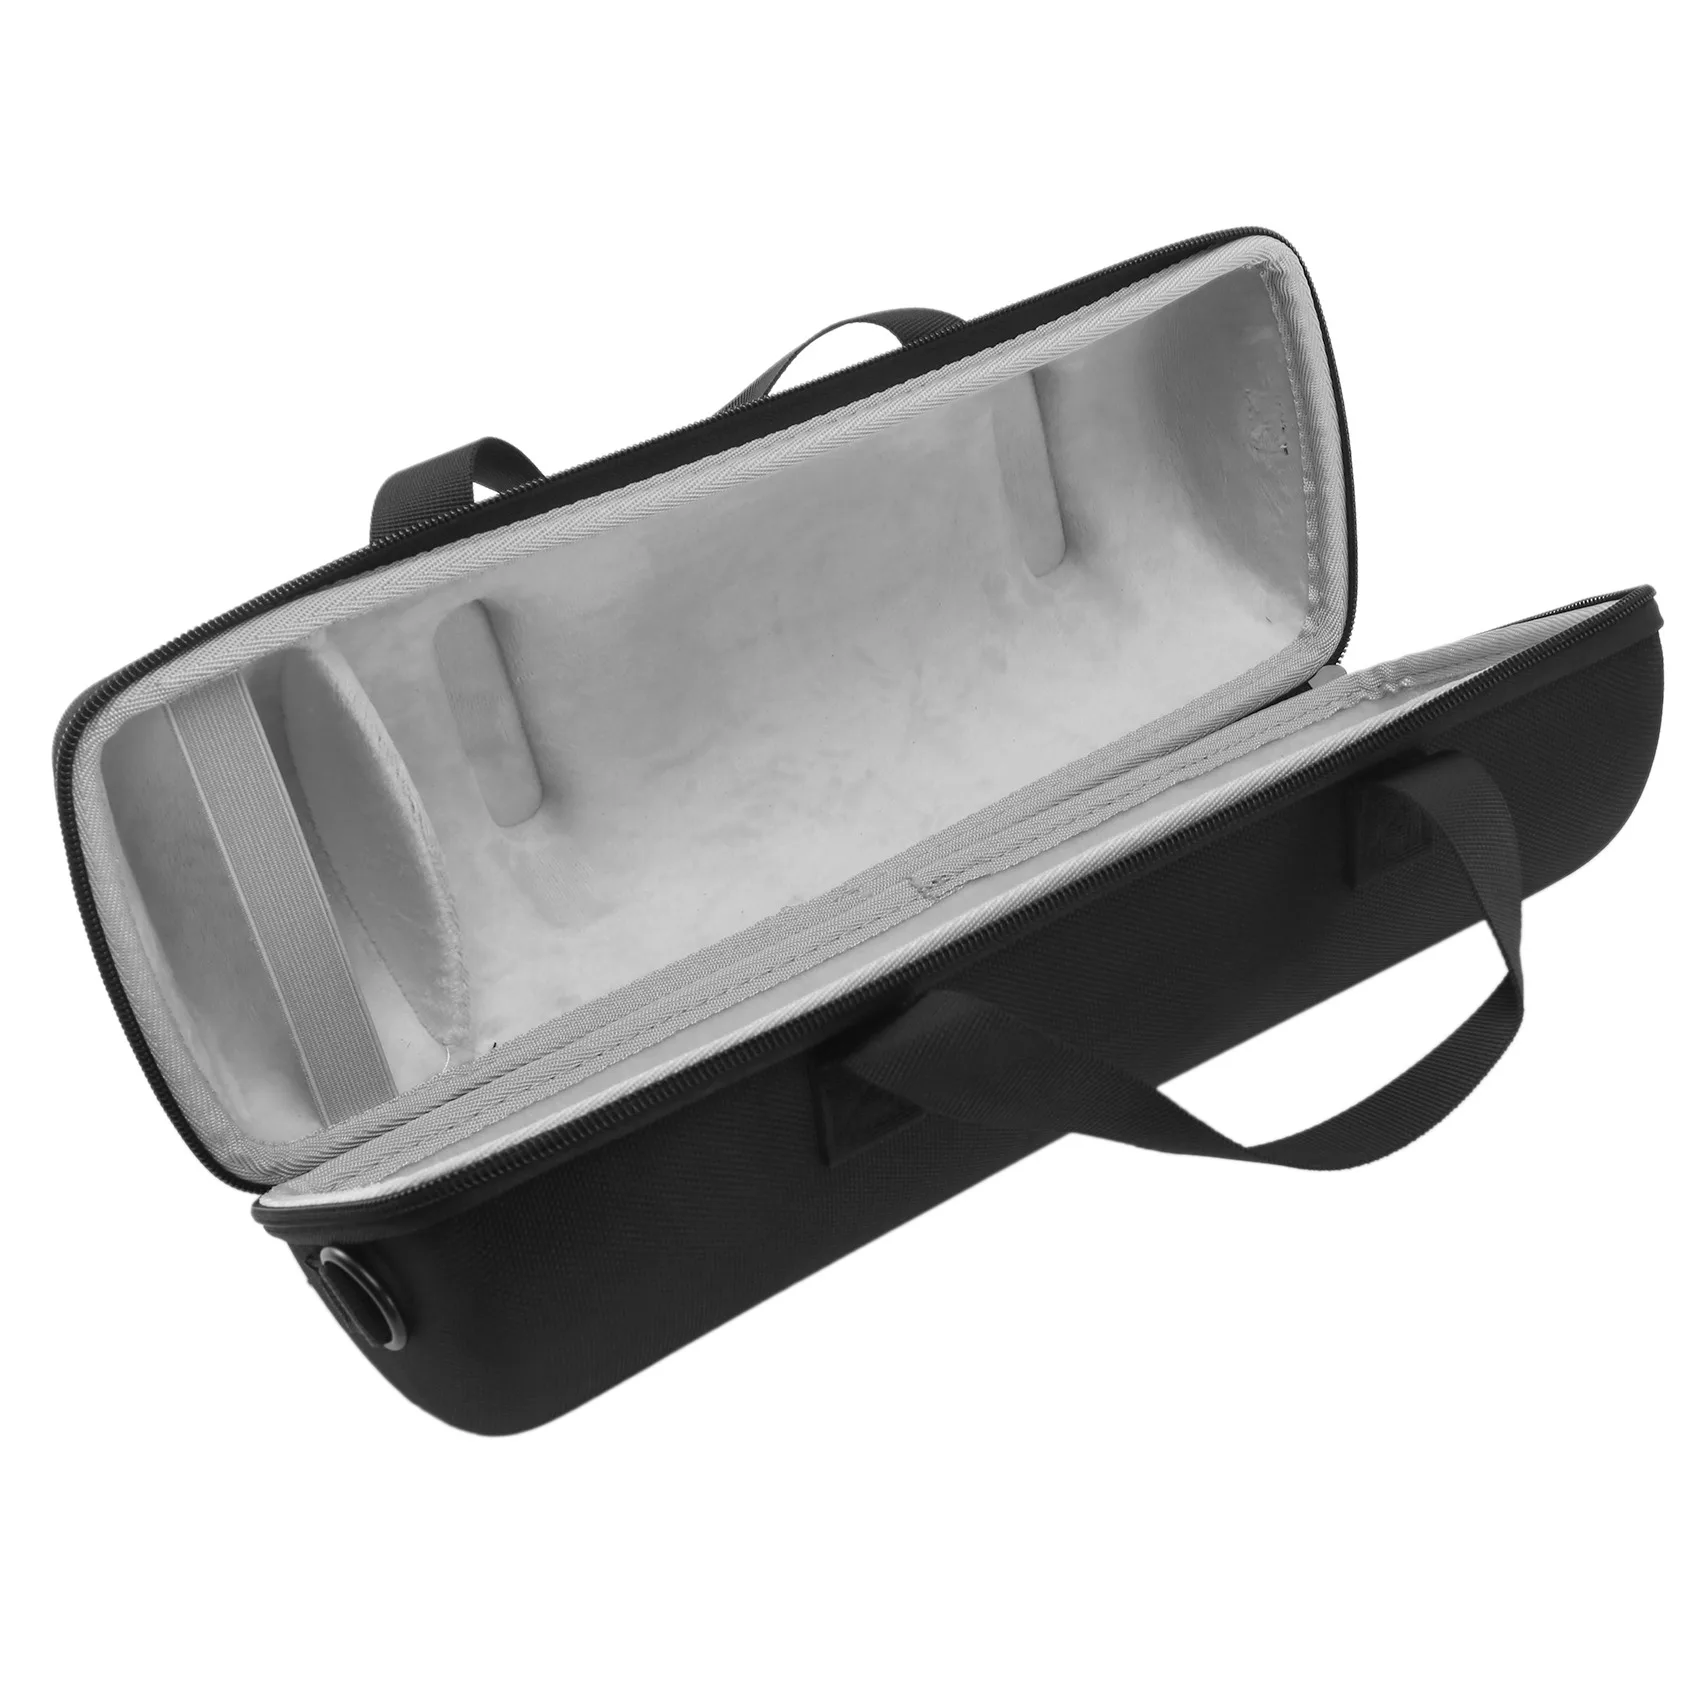 

Newest Eva Hard Travel Carrying Storage Box For Jbl Xtreme 2 Protective Cover Bag Case For Xtreme2 Portable Wireless Speaker Bag